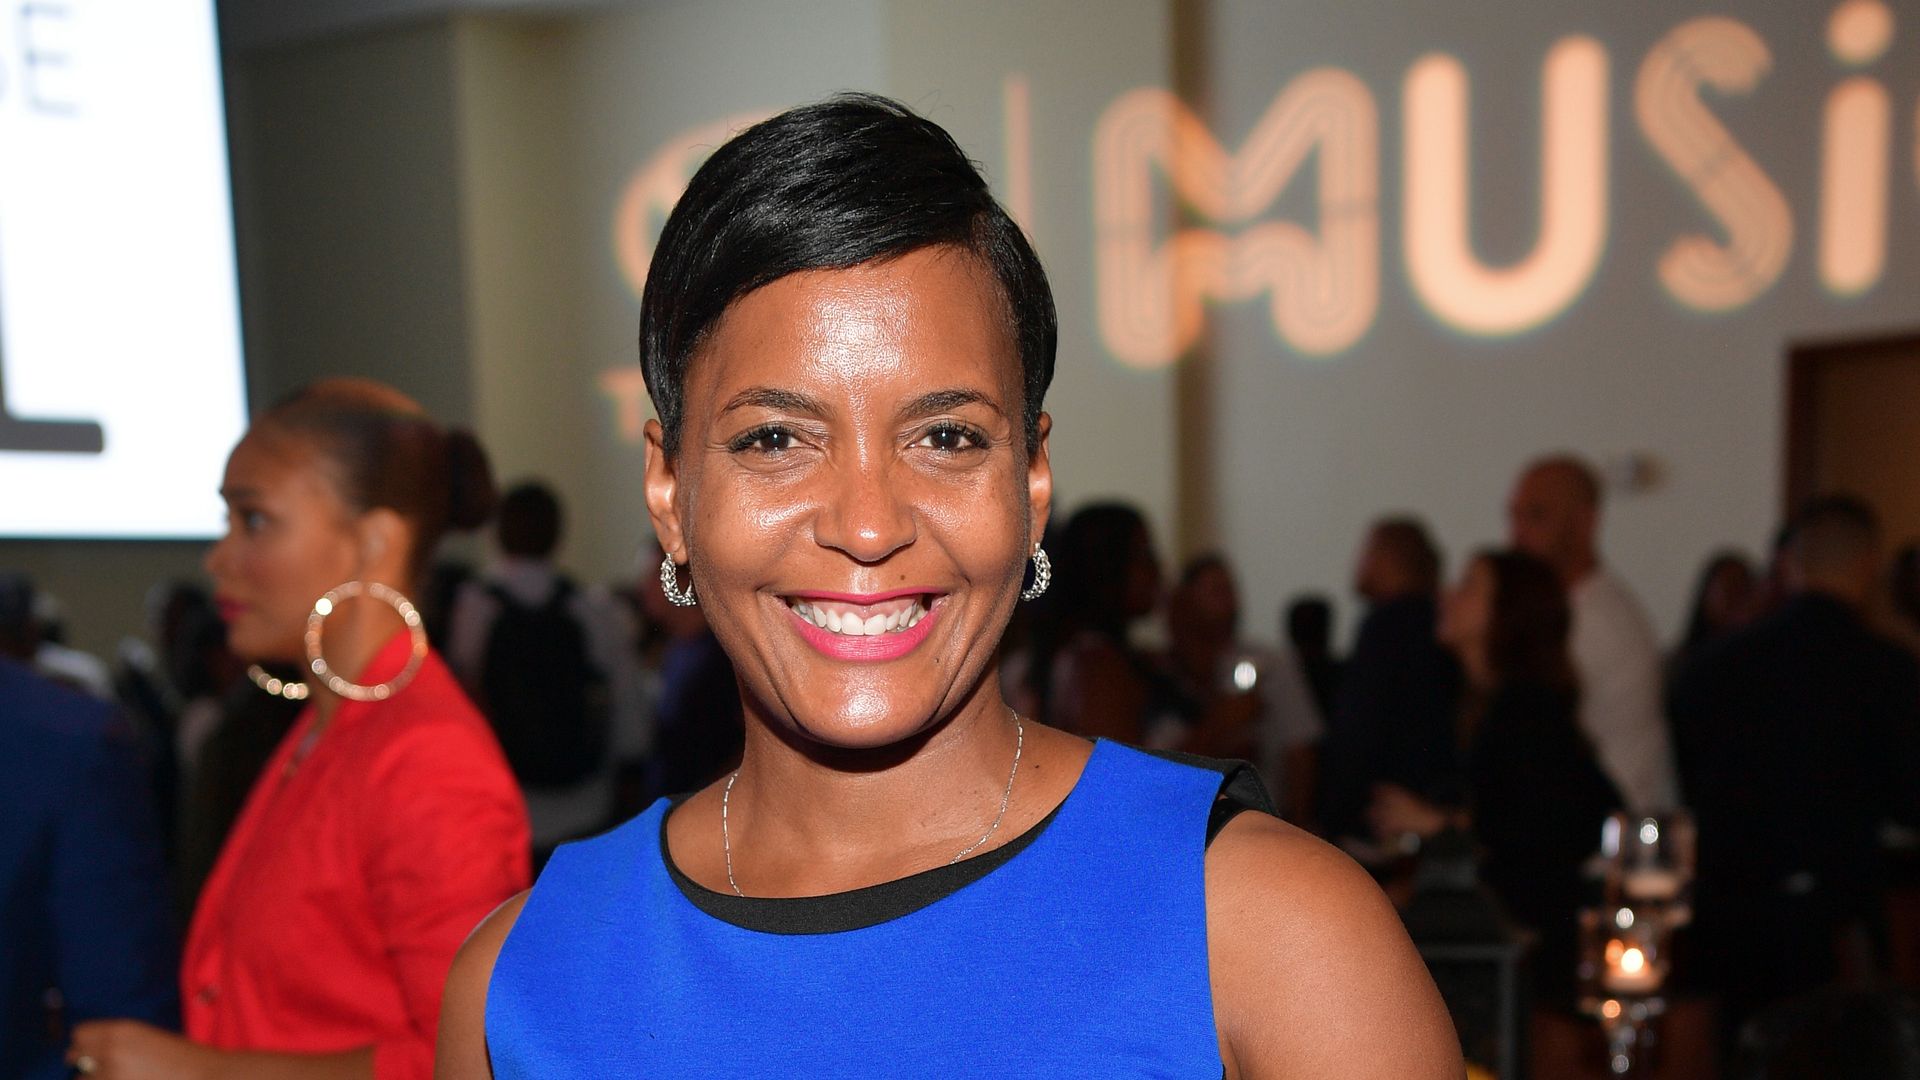 Keisha Lance Bottoms won the Atlanta mayoral election, but the vote is being contested. 